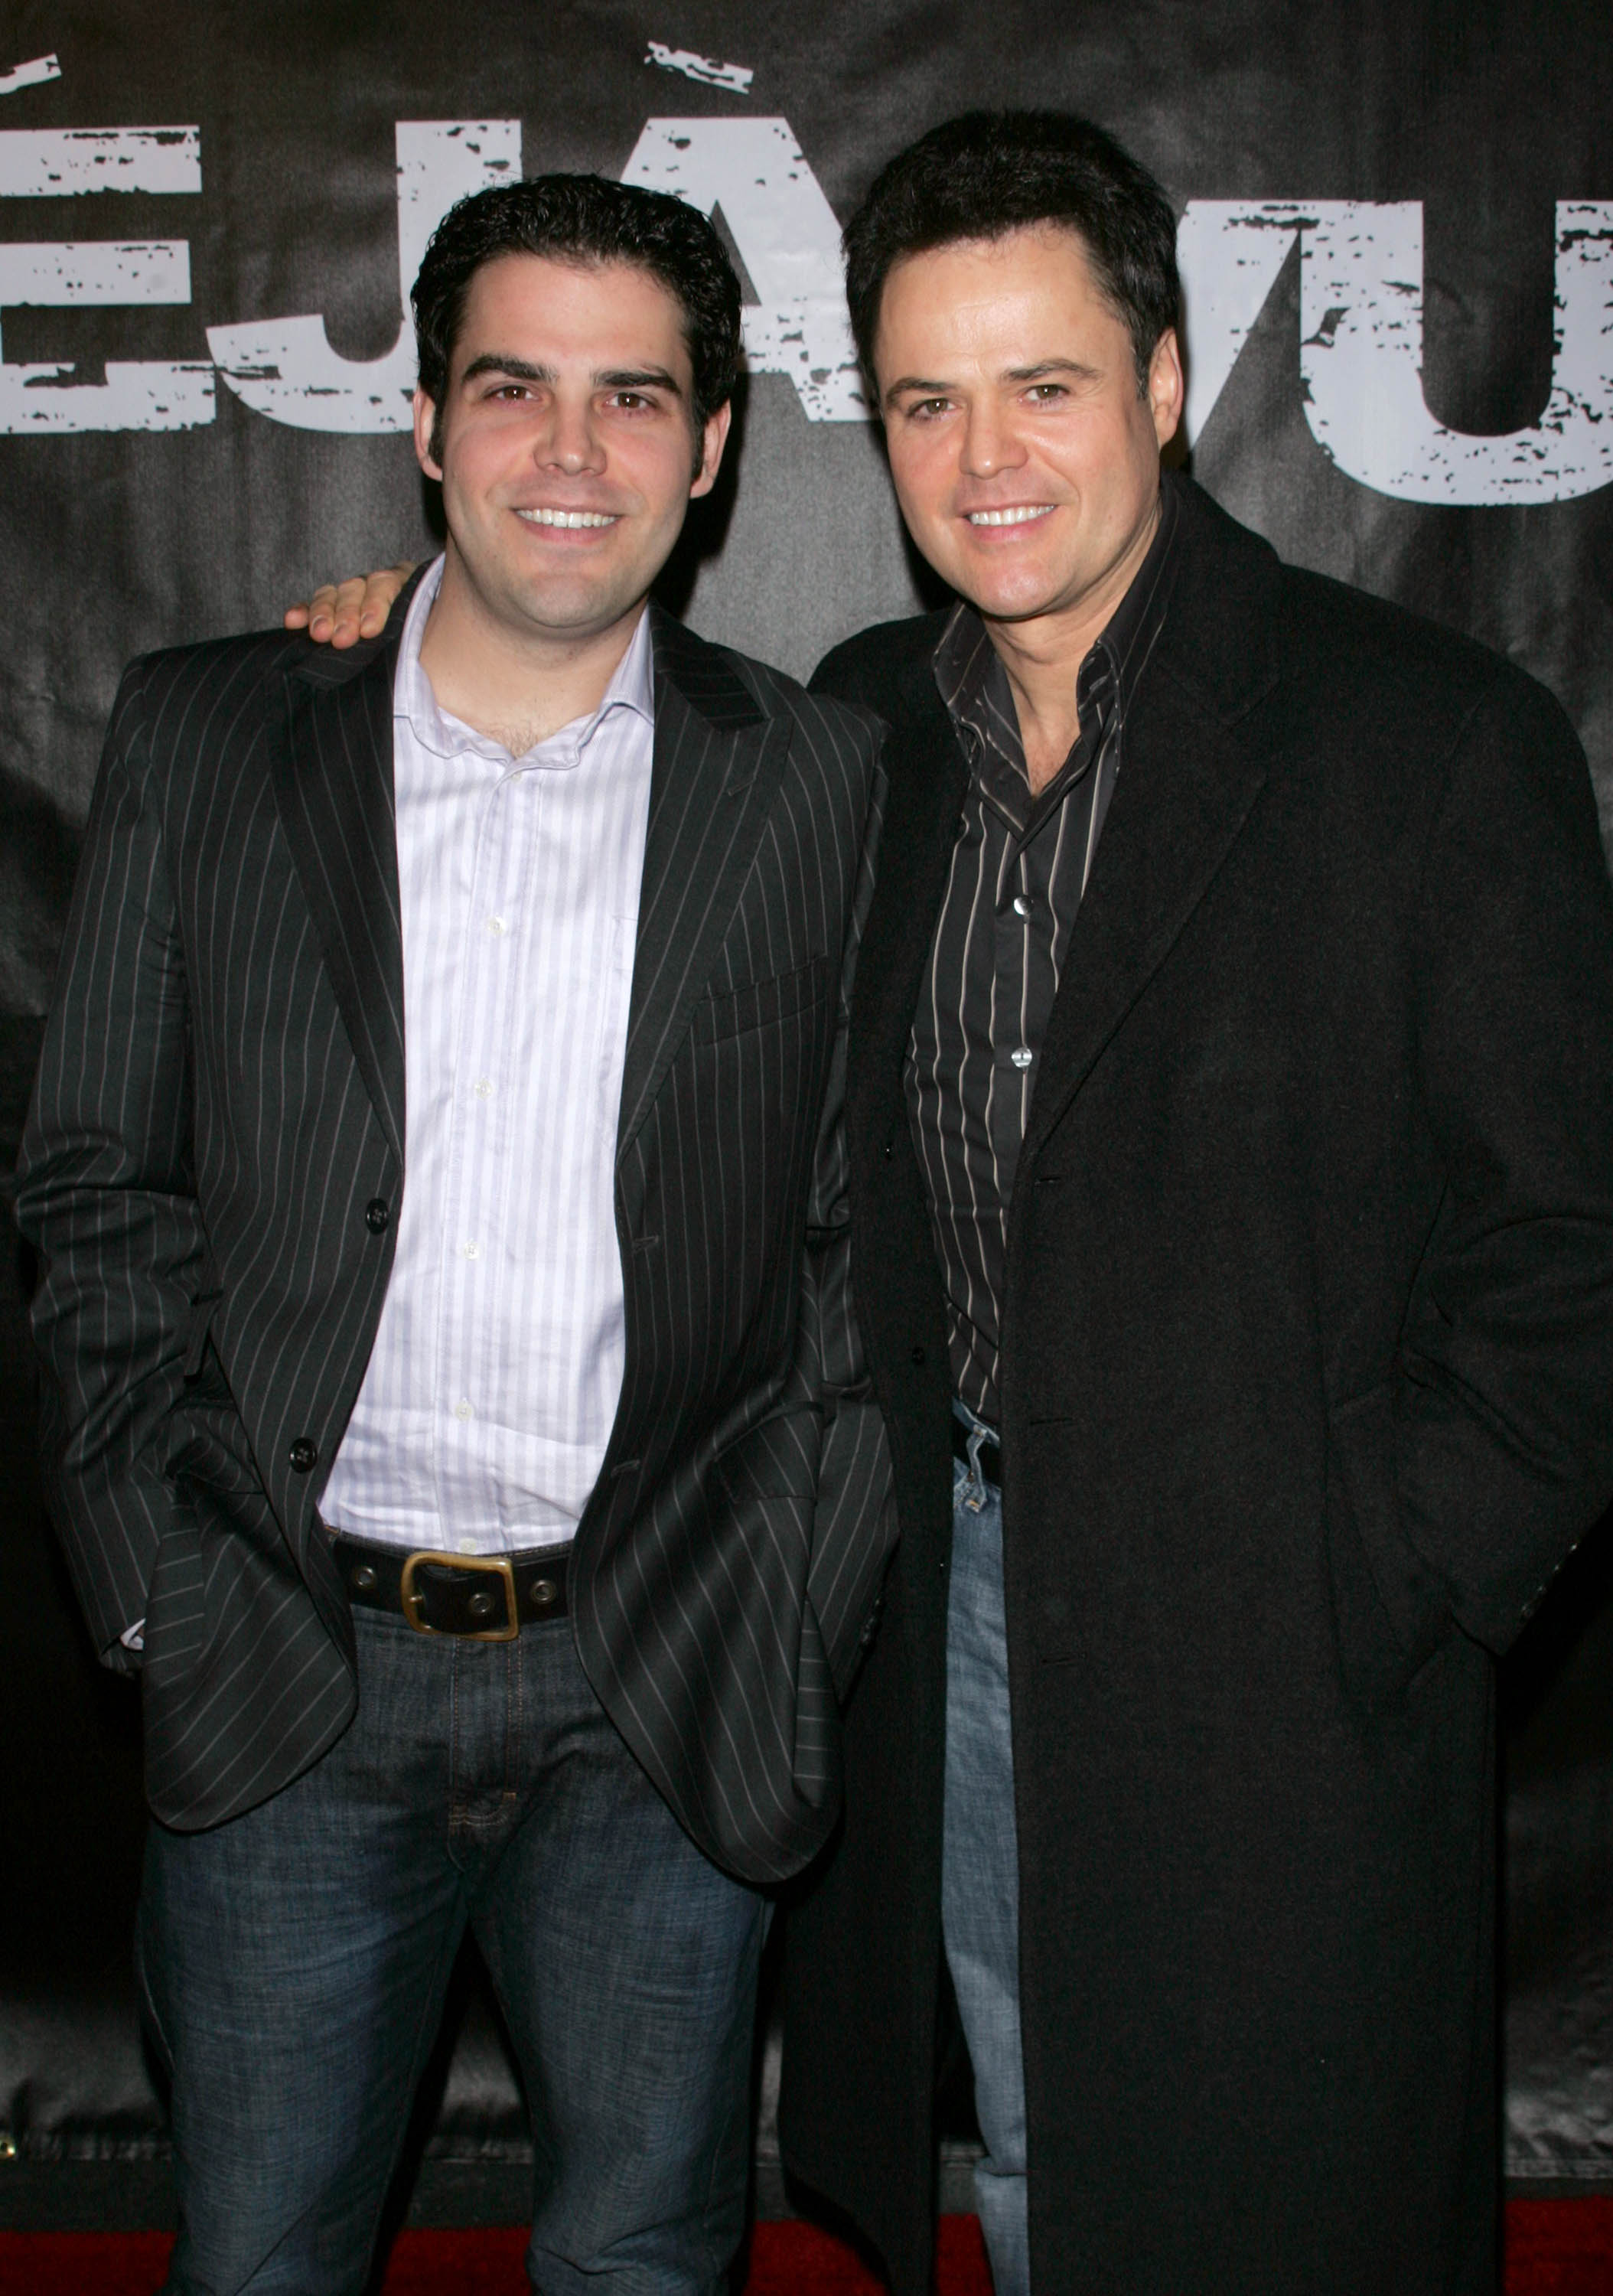 Donny Osmond and his son, Donald Osmond, during Deja Vu New York Premiere at Ziegfeld Theater in New York City | Source: Getty Images